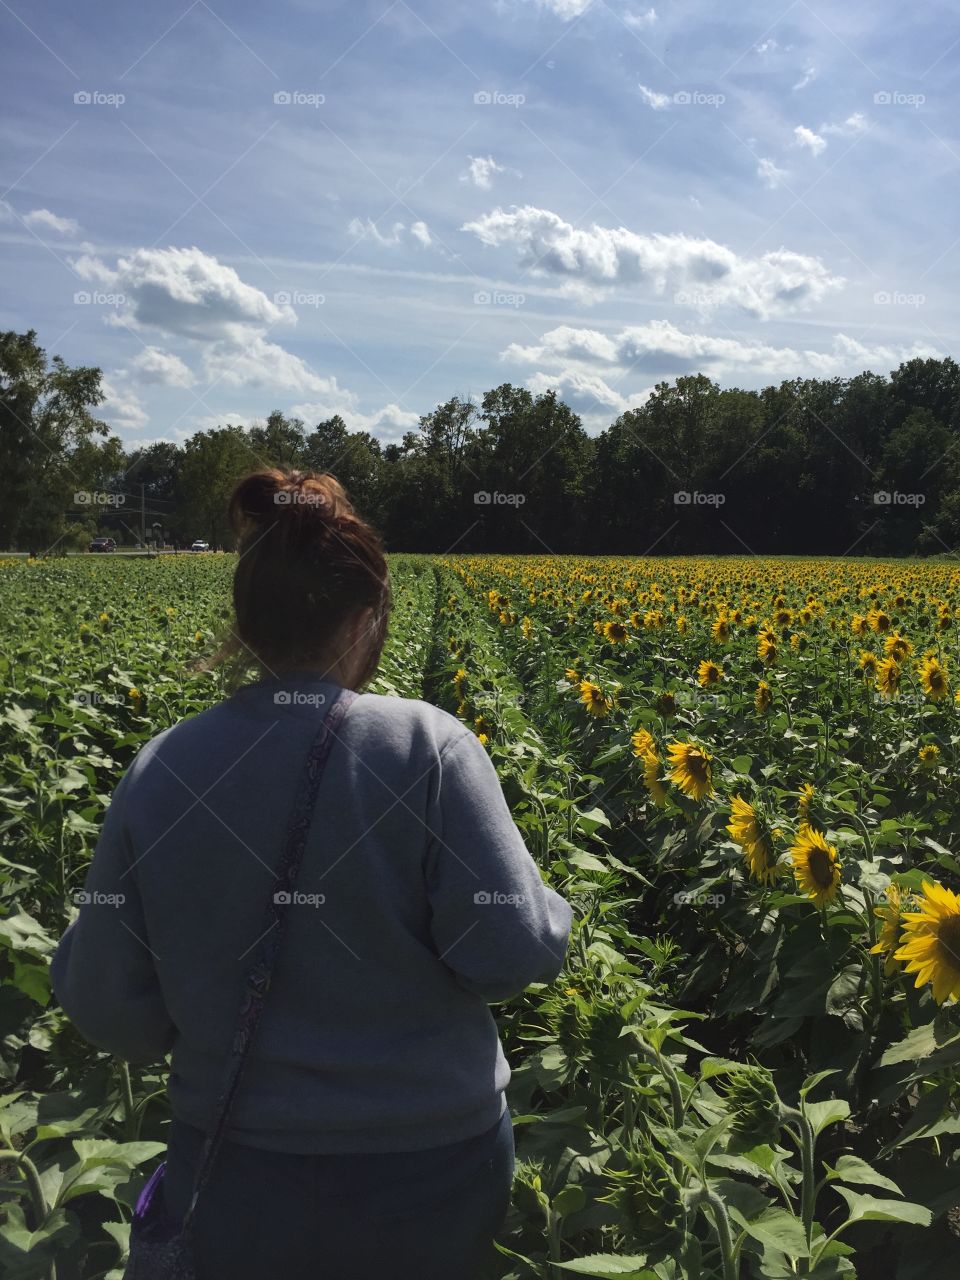 I brought my girlfriend to a gorgeous sunflower field 